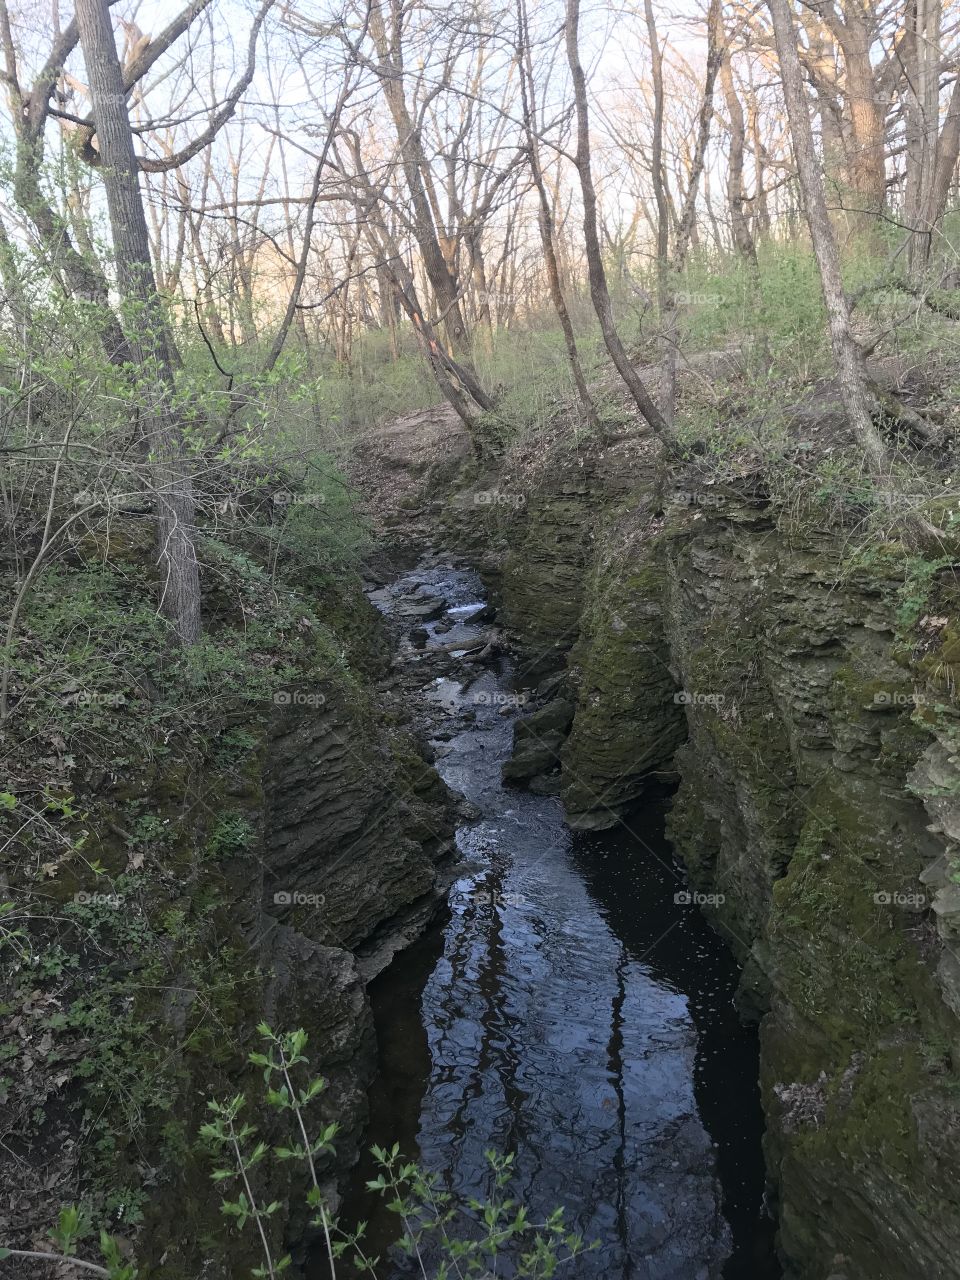 A creek at the bottom of a ravine near the Indian Caves hidden back between Perry Farm and the Kankakee River in Kankakee, IL.